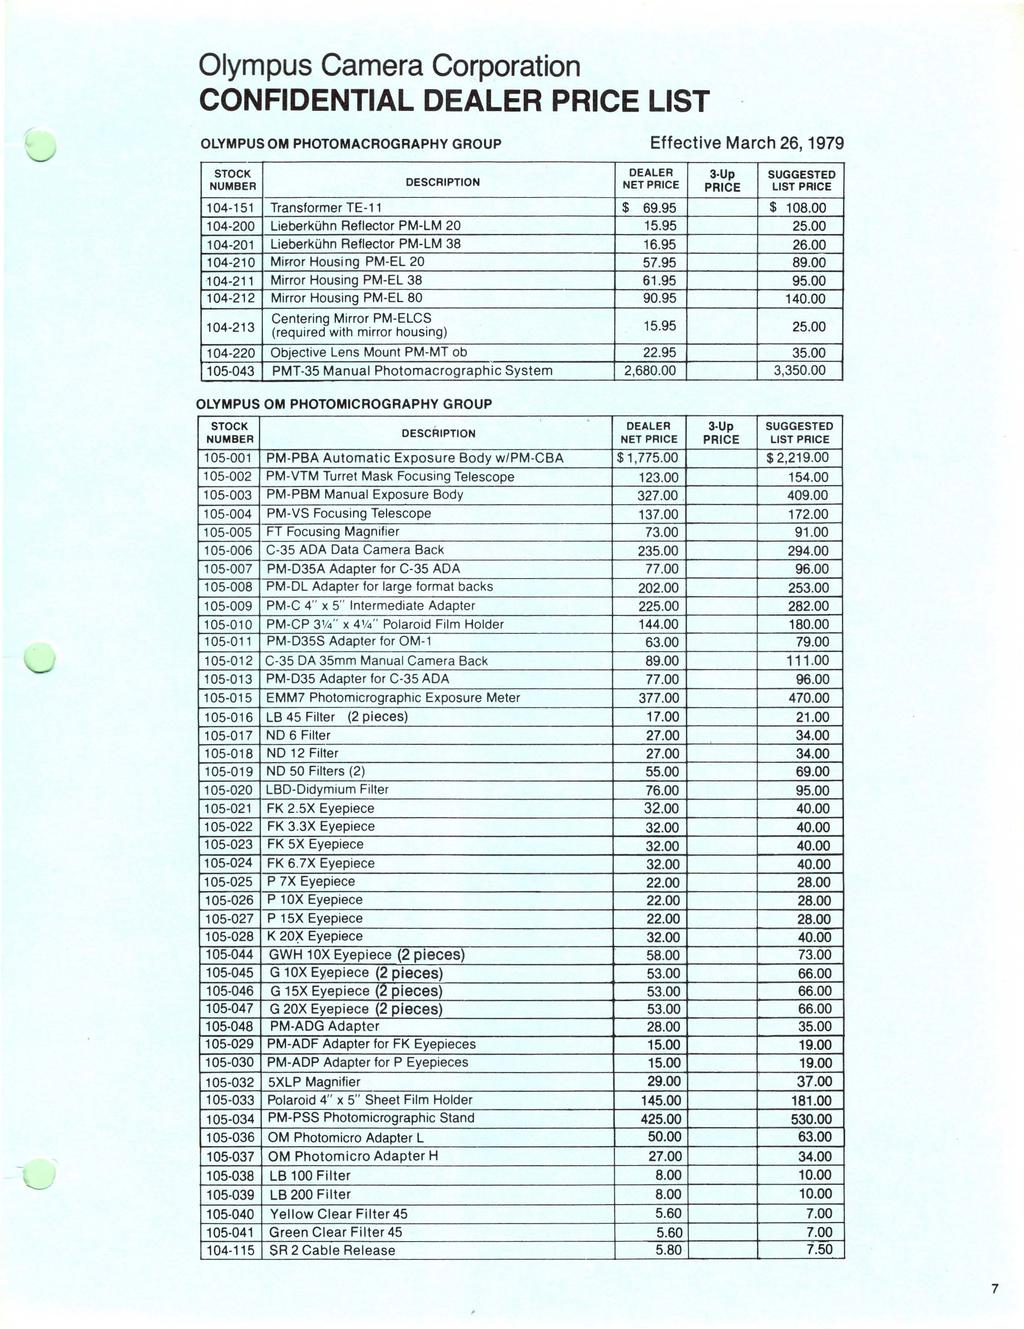 CONFIDENTIAL DEALER PRICE LIST OLYMPUS OM PHOTOMACROGRAPHY GROUP Effective March 26, 1979 DEALER 3 Up NET PRICE PRICE 104 1 51 Transformer TE 11 $ 69.95 $ 108.